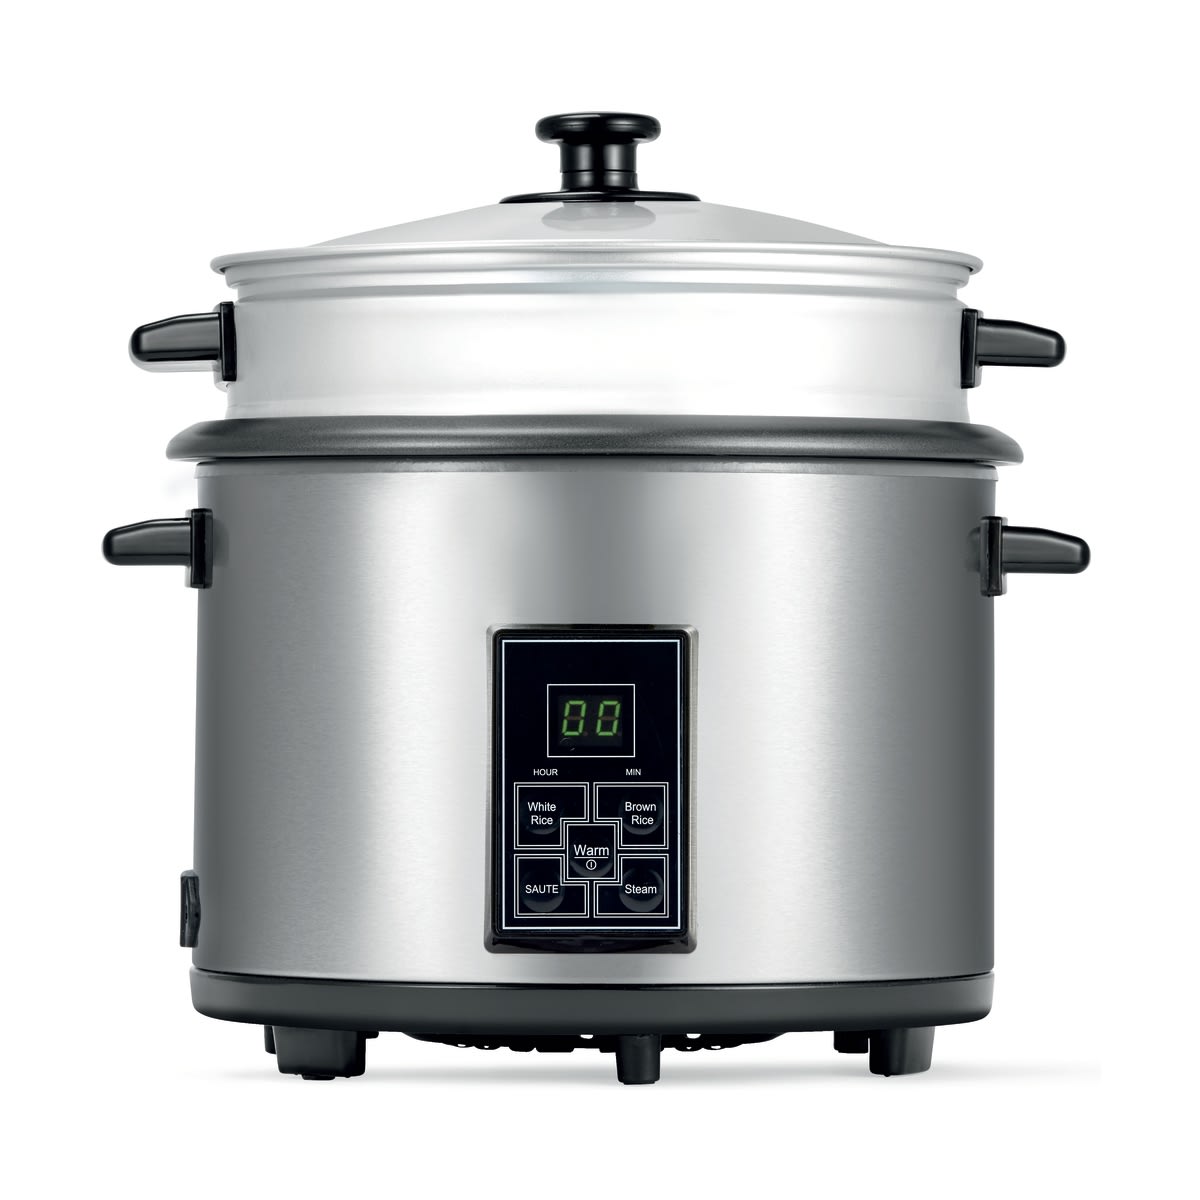 Westinghouse 10 Cup Rice Cooker Keep Warm Function